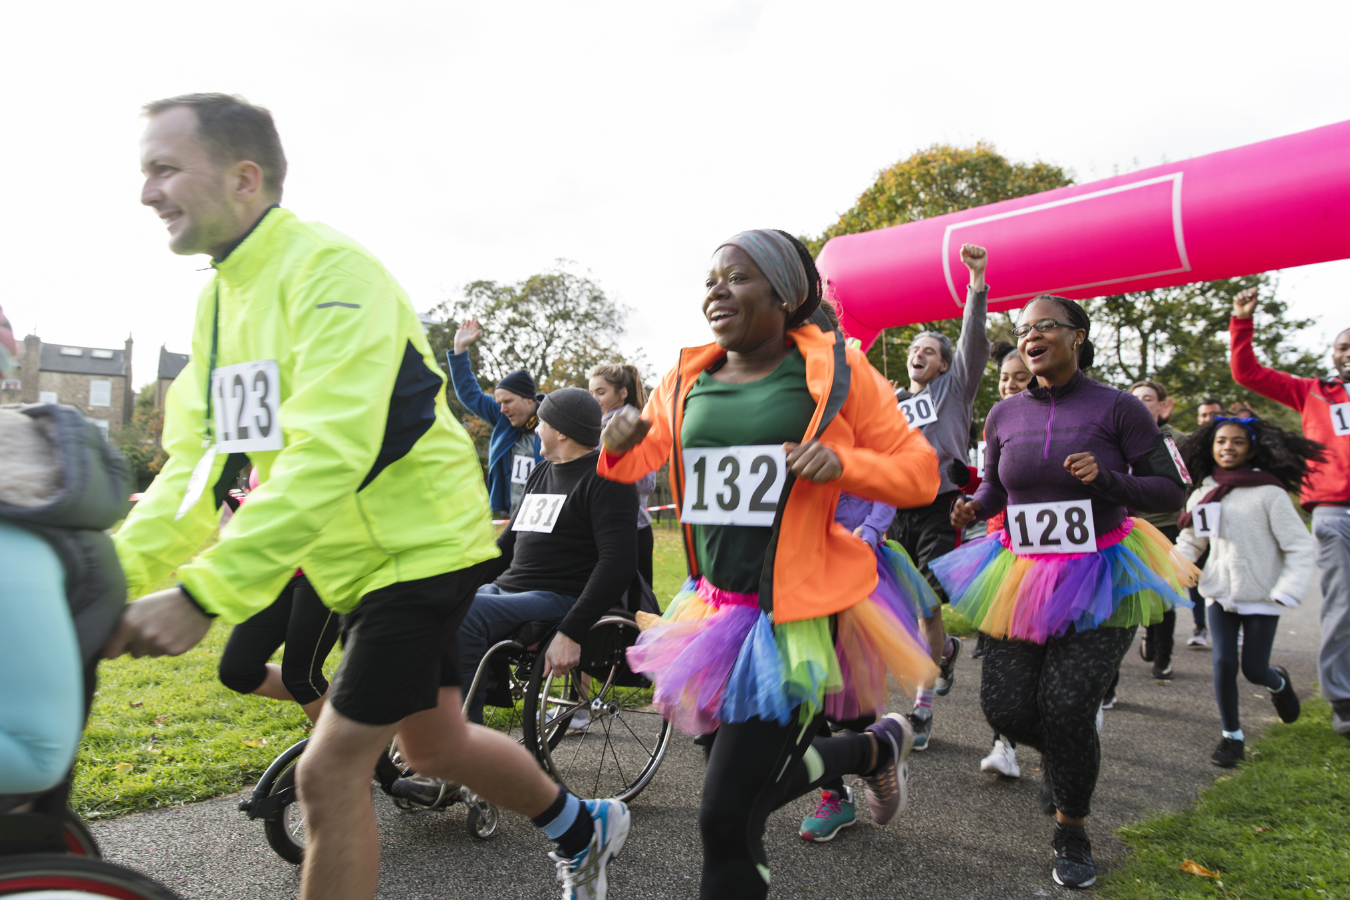 Participants in costumes joyfully completing a charity run. Sparkrock 365 ERP supports charity events, optimizing efficiency for smoother organization and better resource allocation through technology.